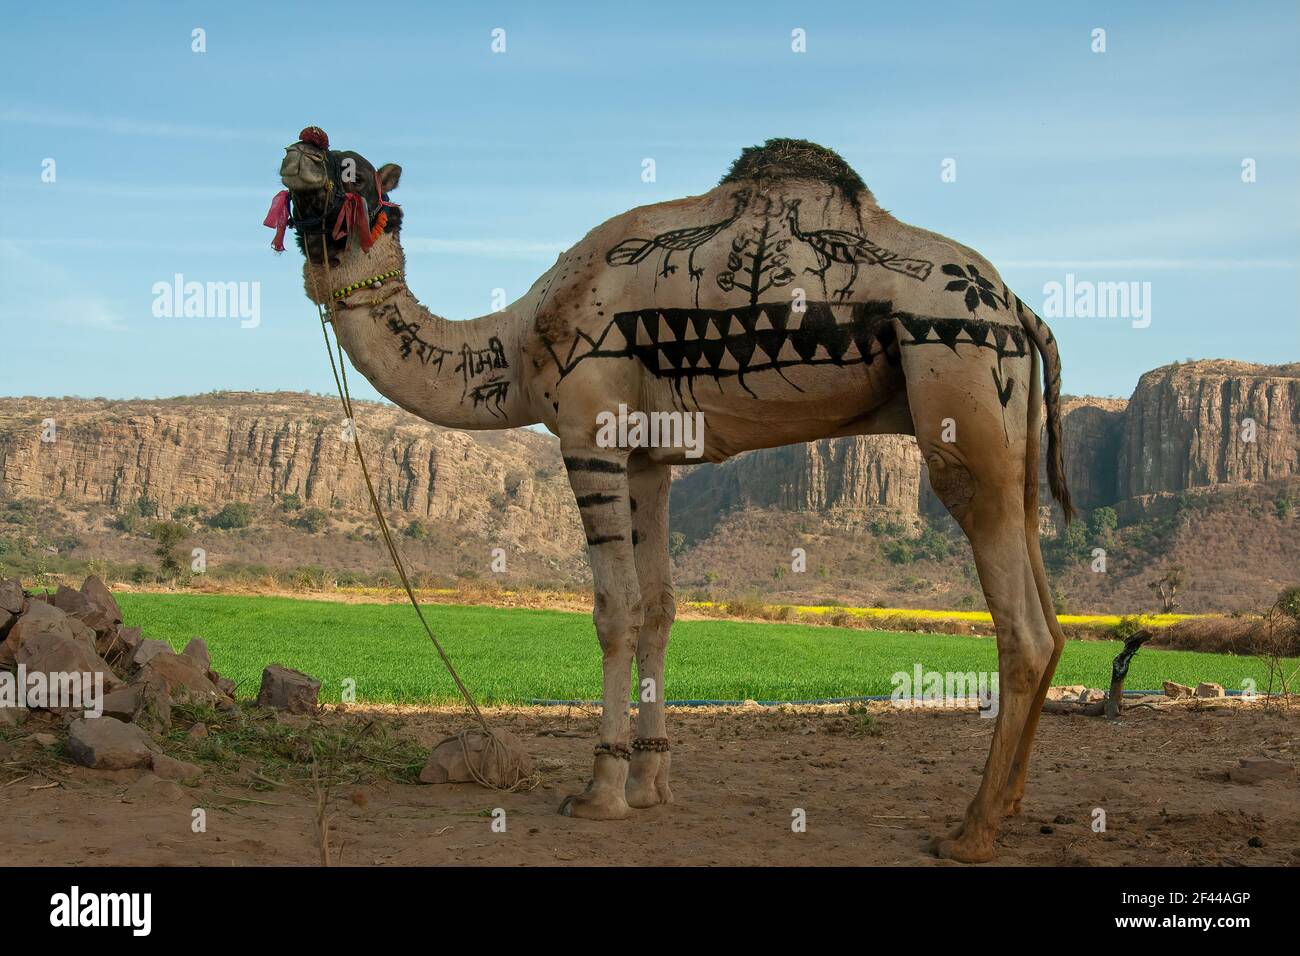 Domesticated camel standing in front of farm lands with mountains in the background in the desert state of Rajasthan, India, Asia Stock Photo